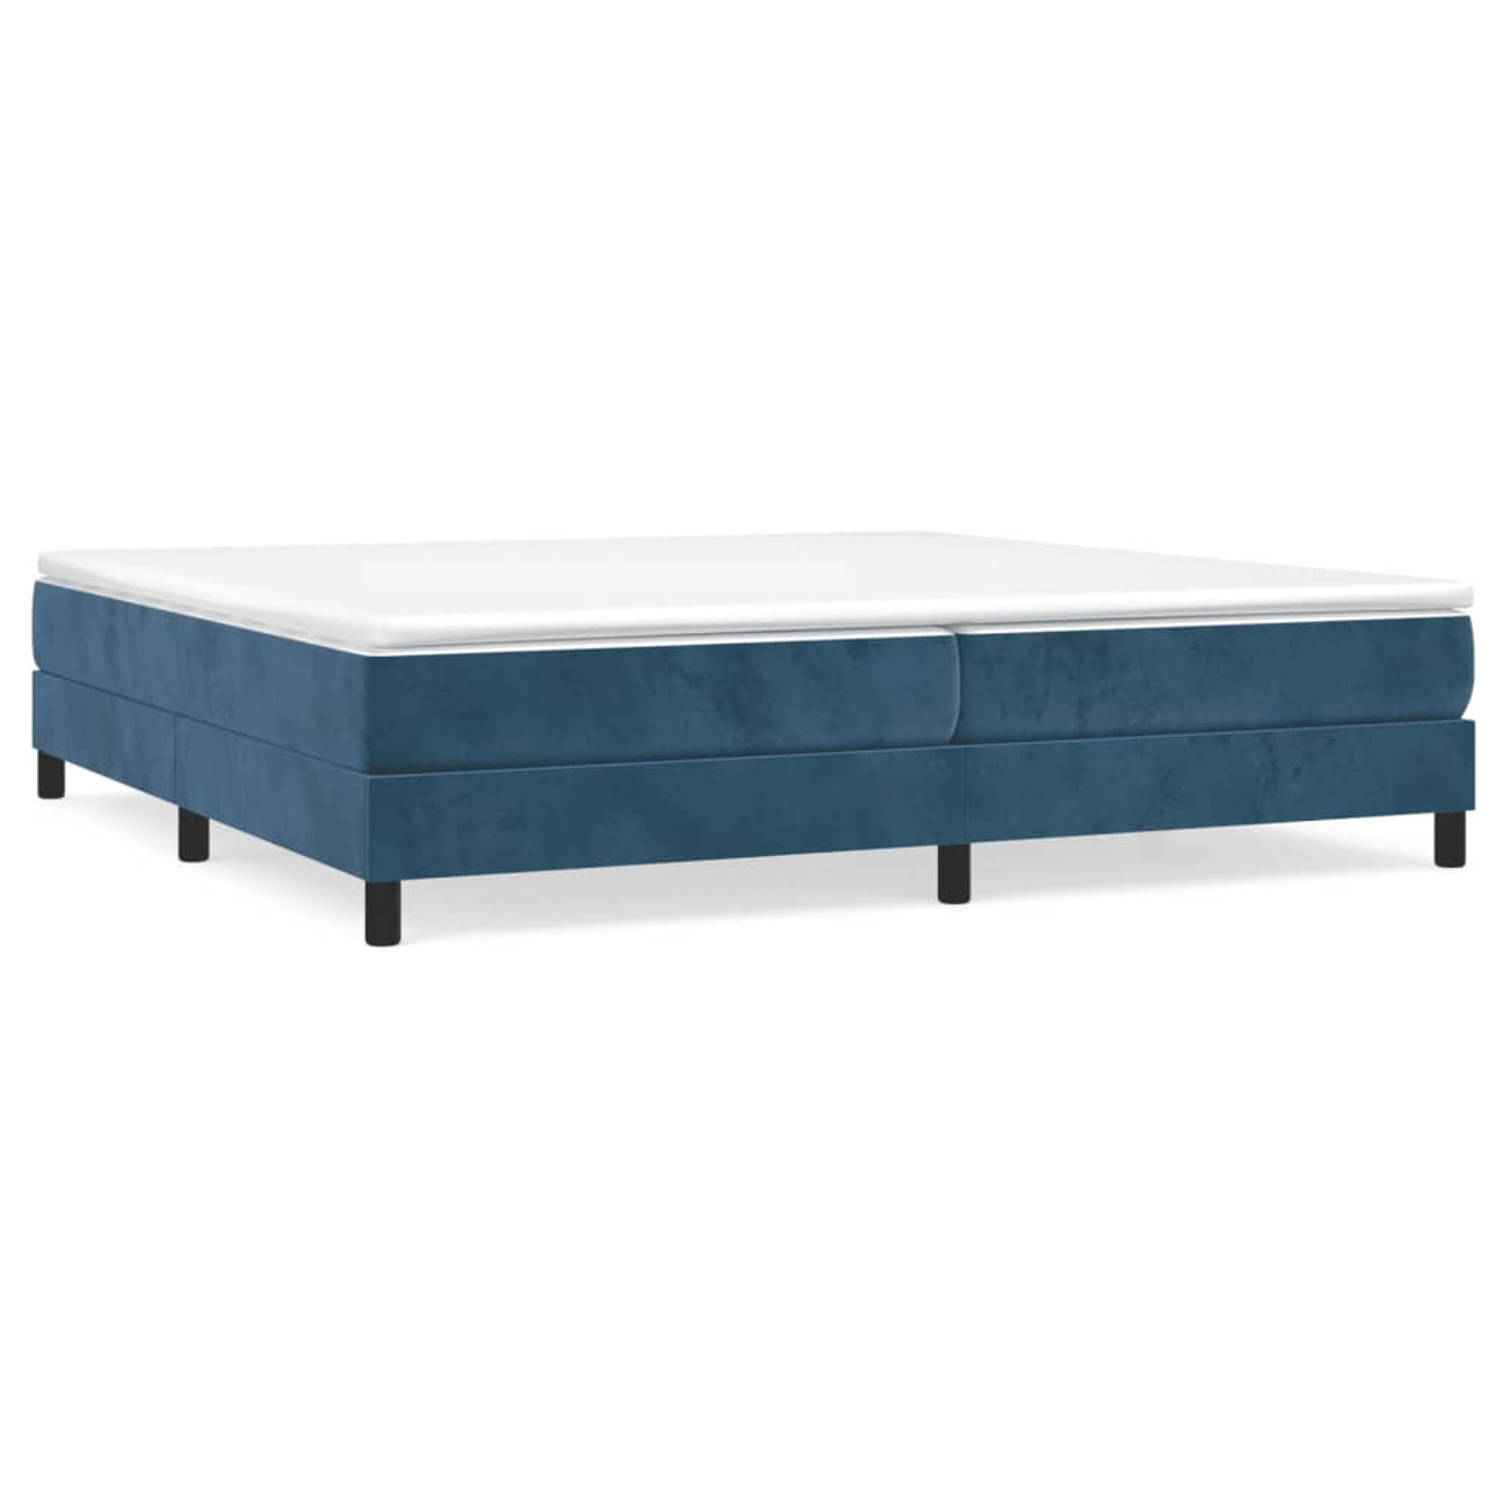 The Living Store Boxspringframe fluweel donkerblauw 200x200 cm - Bed